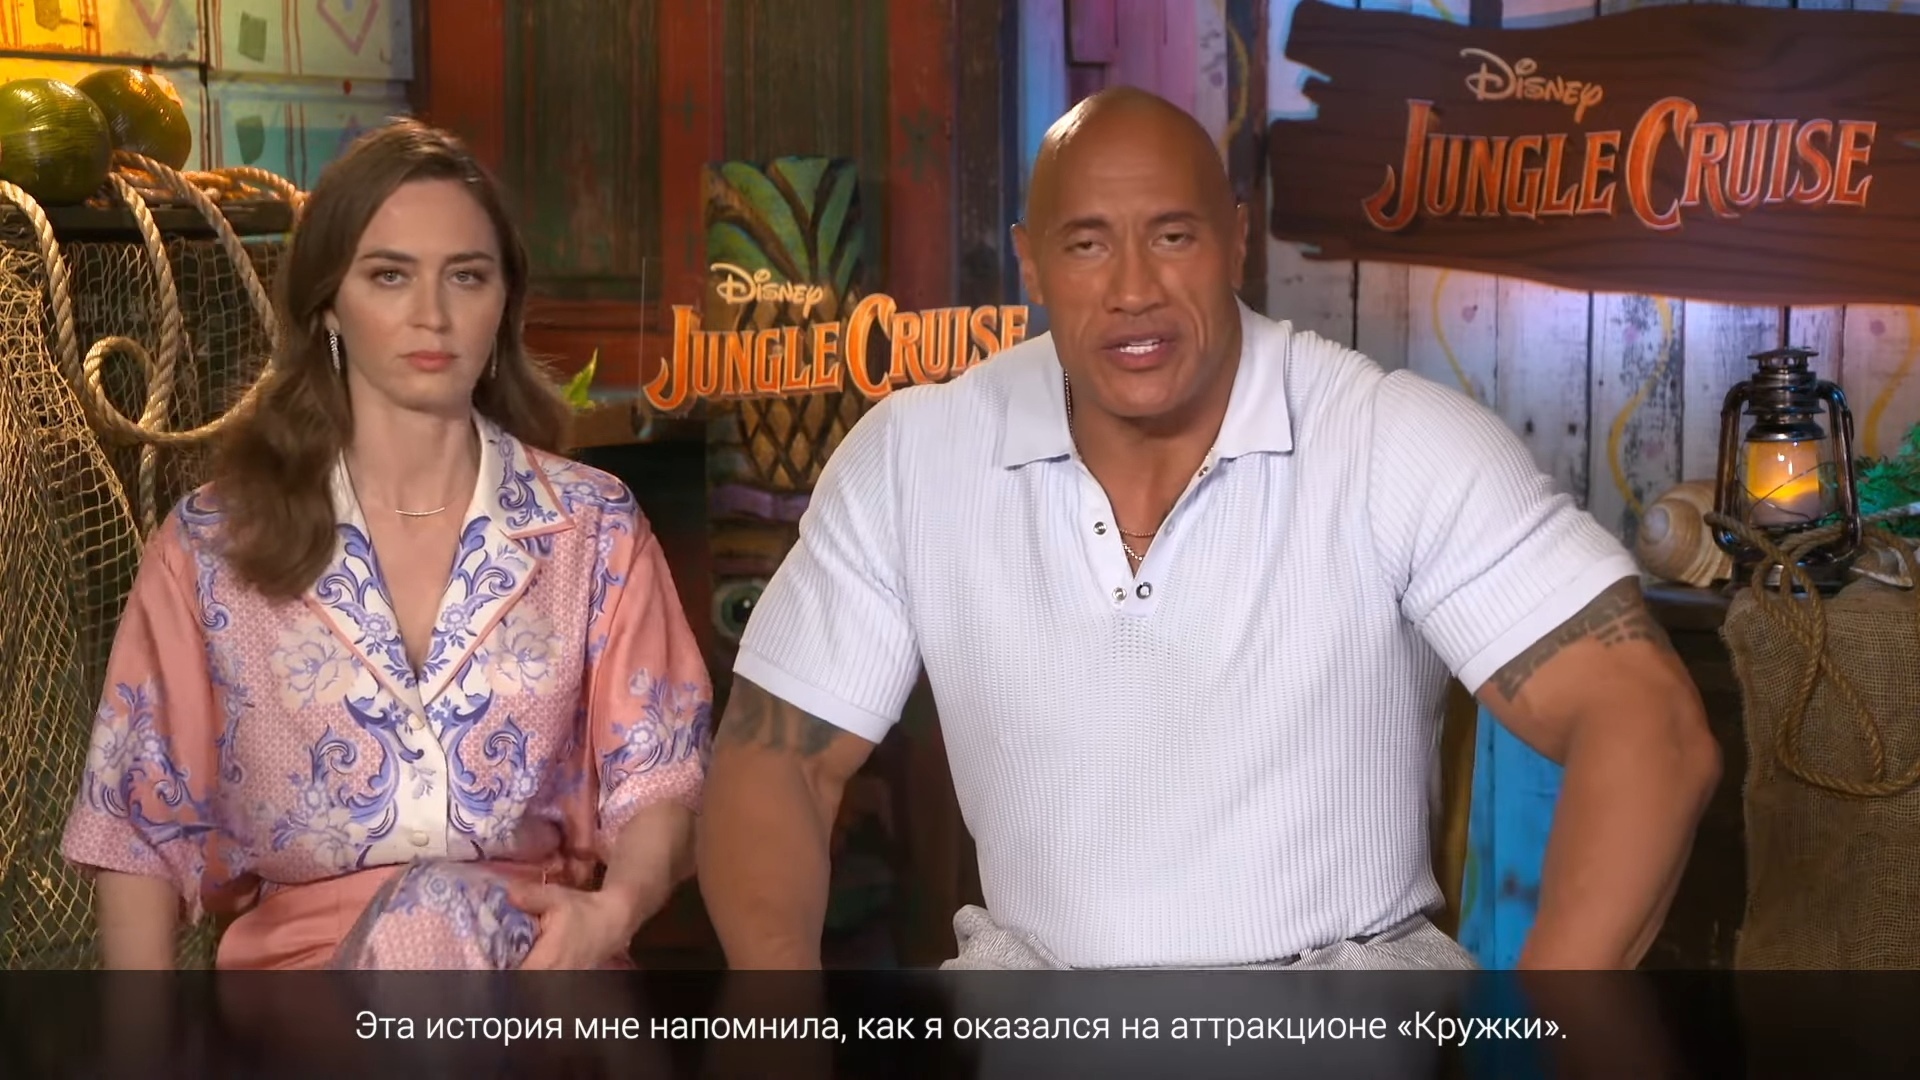 dangerous attraction - Emily Blunt, Dwayne Johnson, Actors and actresses, Celebrities, Storyboard, Attraction, Interview, From the network, Longpost